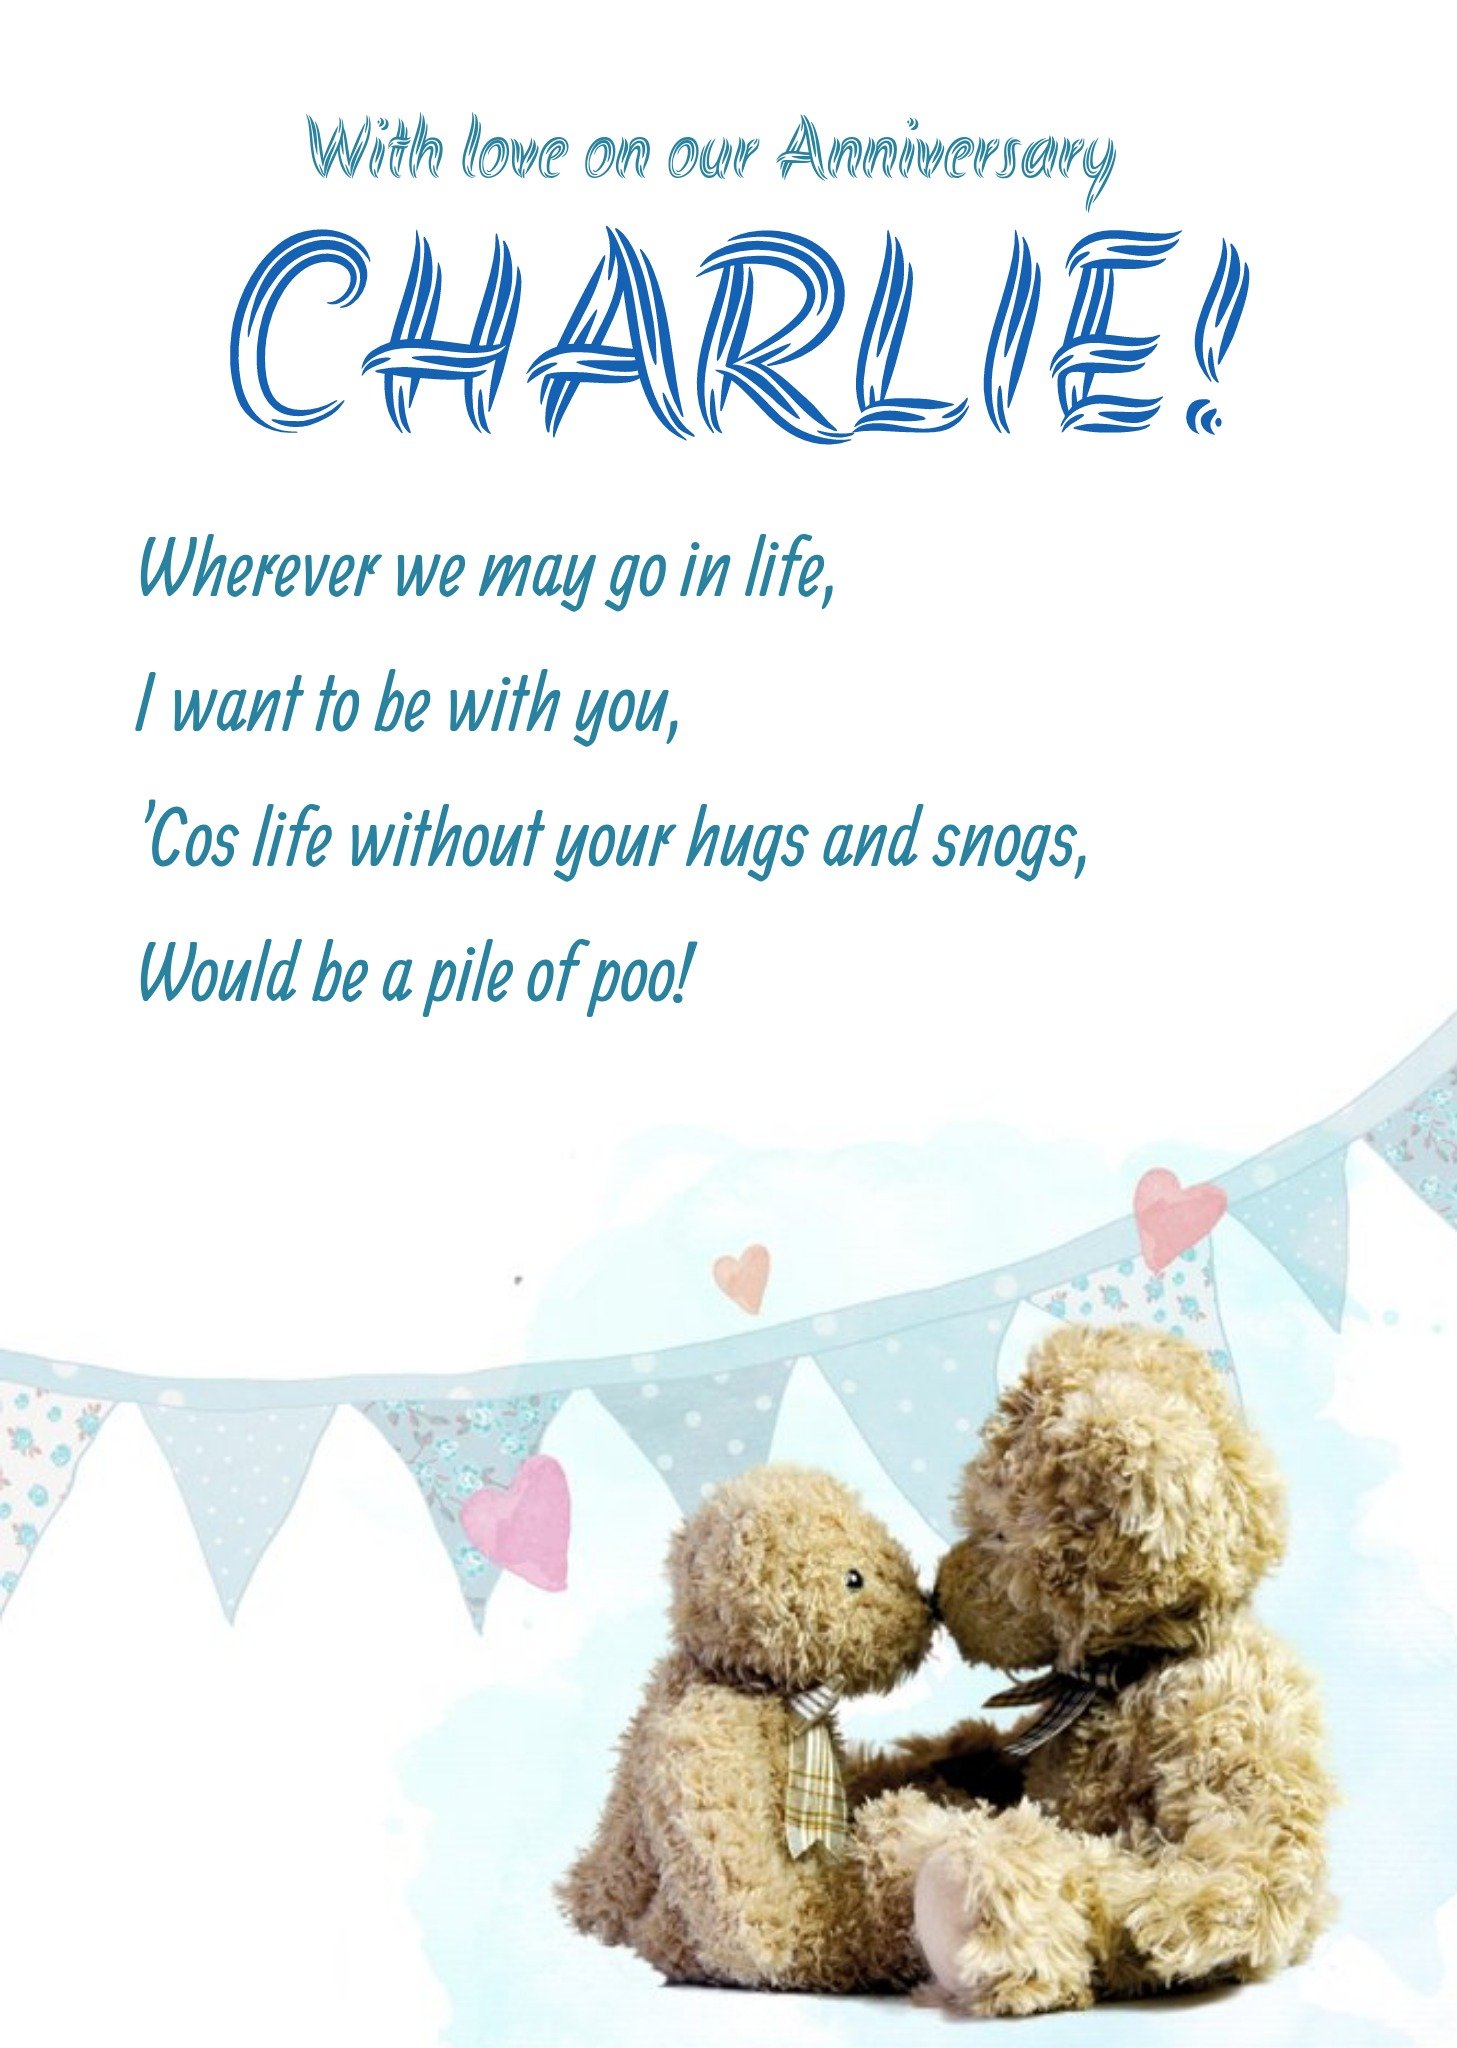 Moonpig Teddies In Love With Poem Personalised Happy Anniversary Card, Large